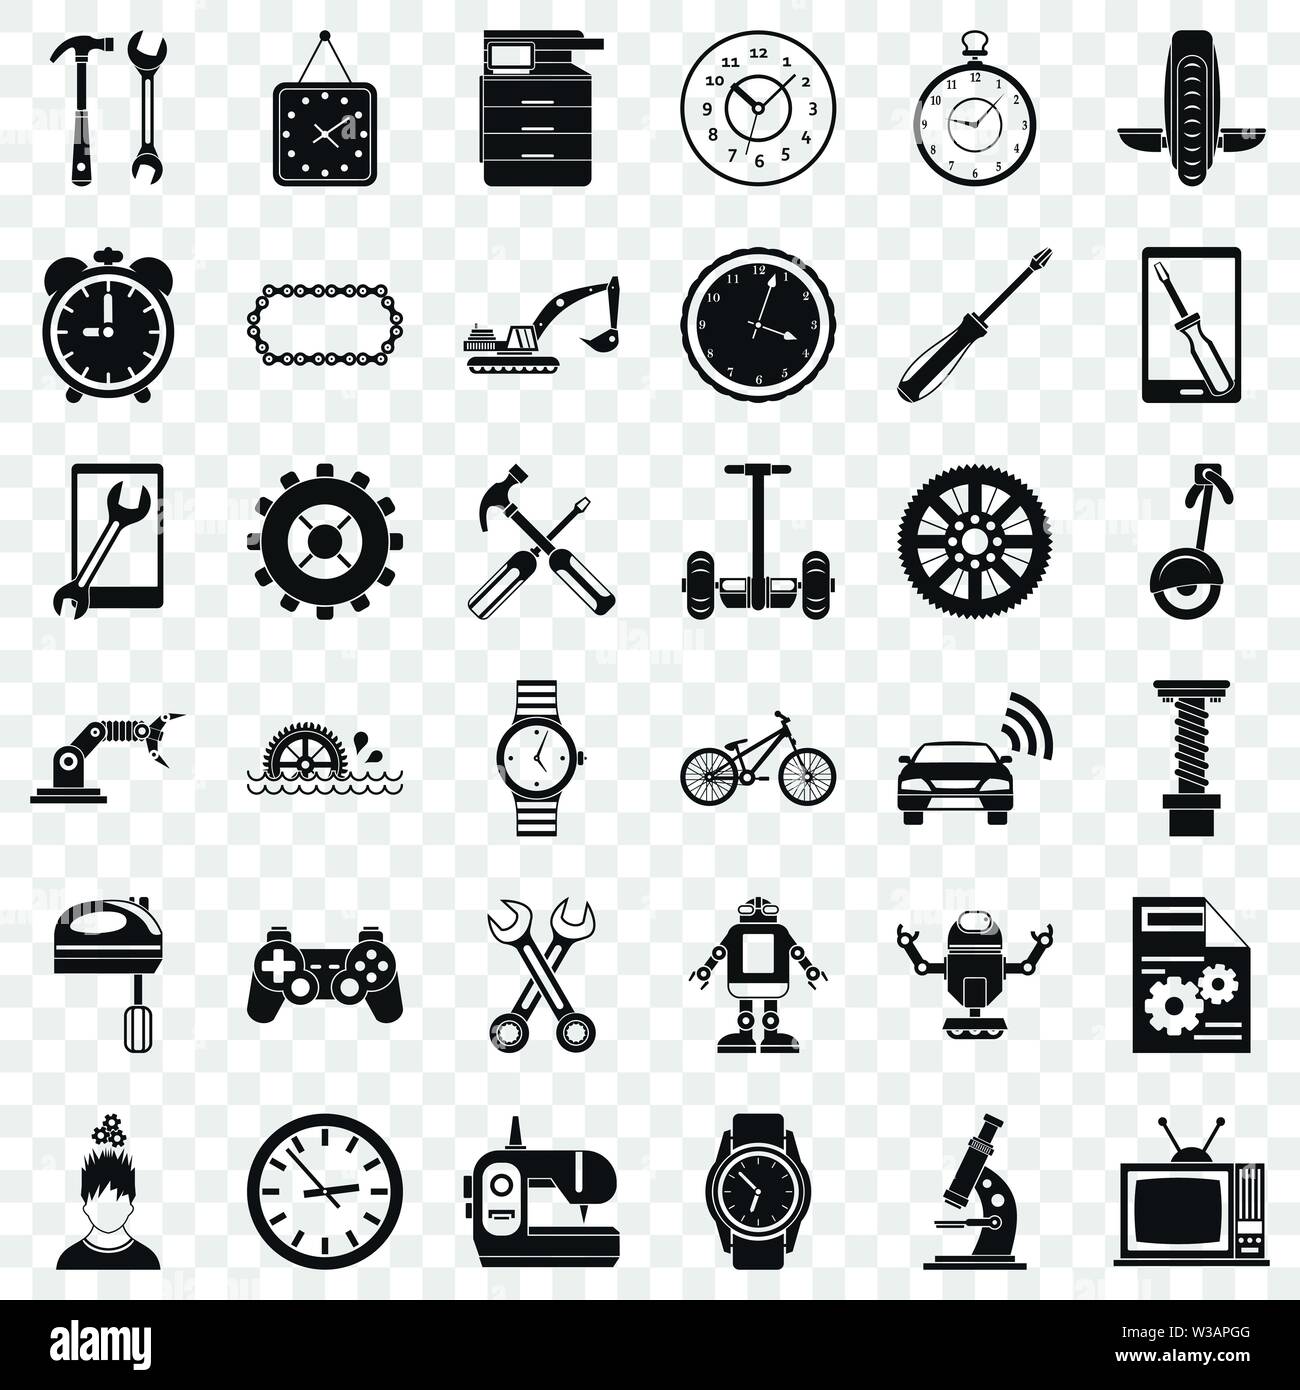 Auto repair icons set, simple style Stock Vector